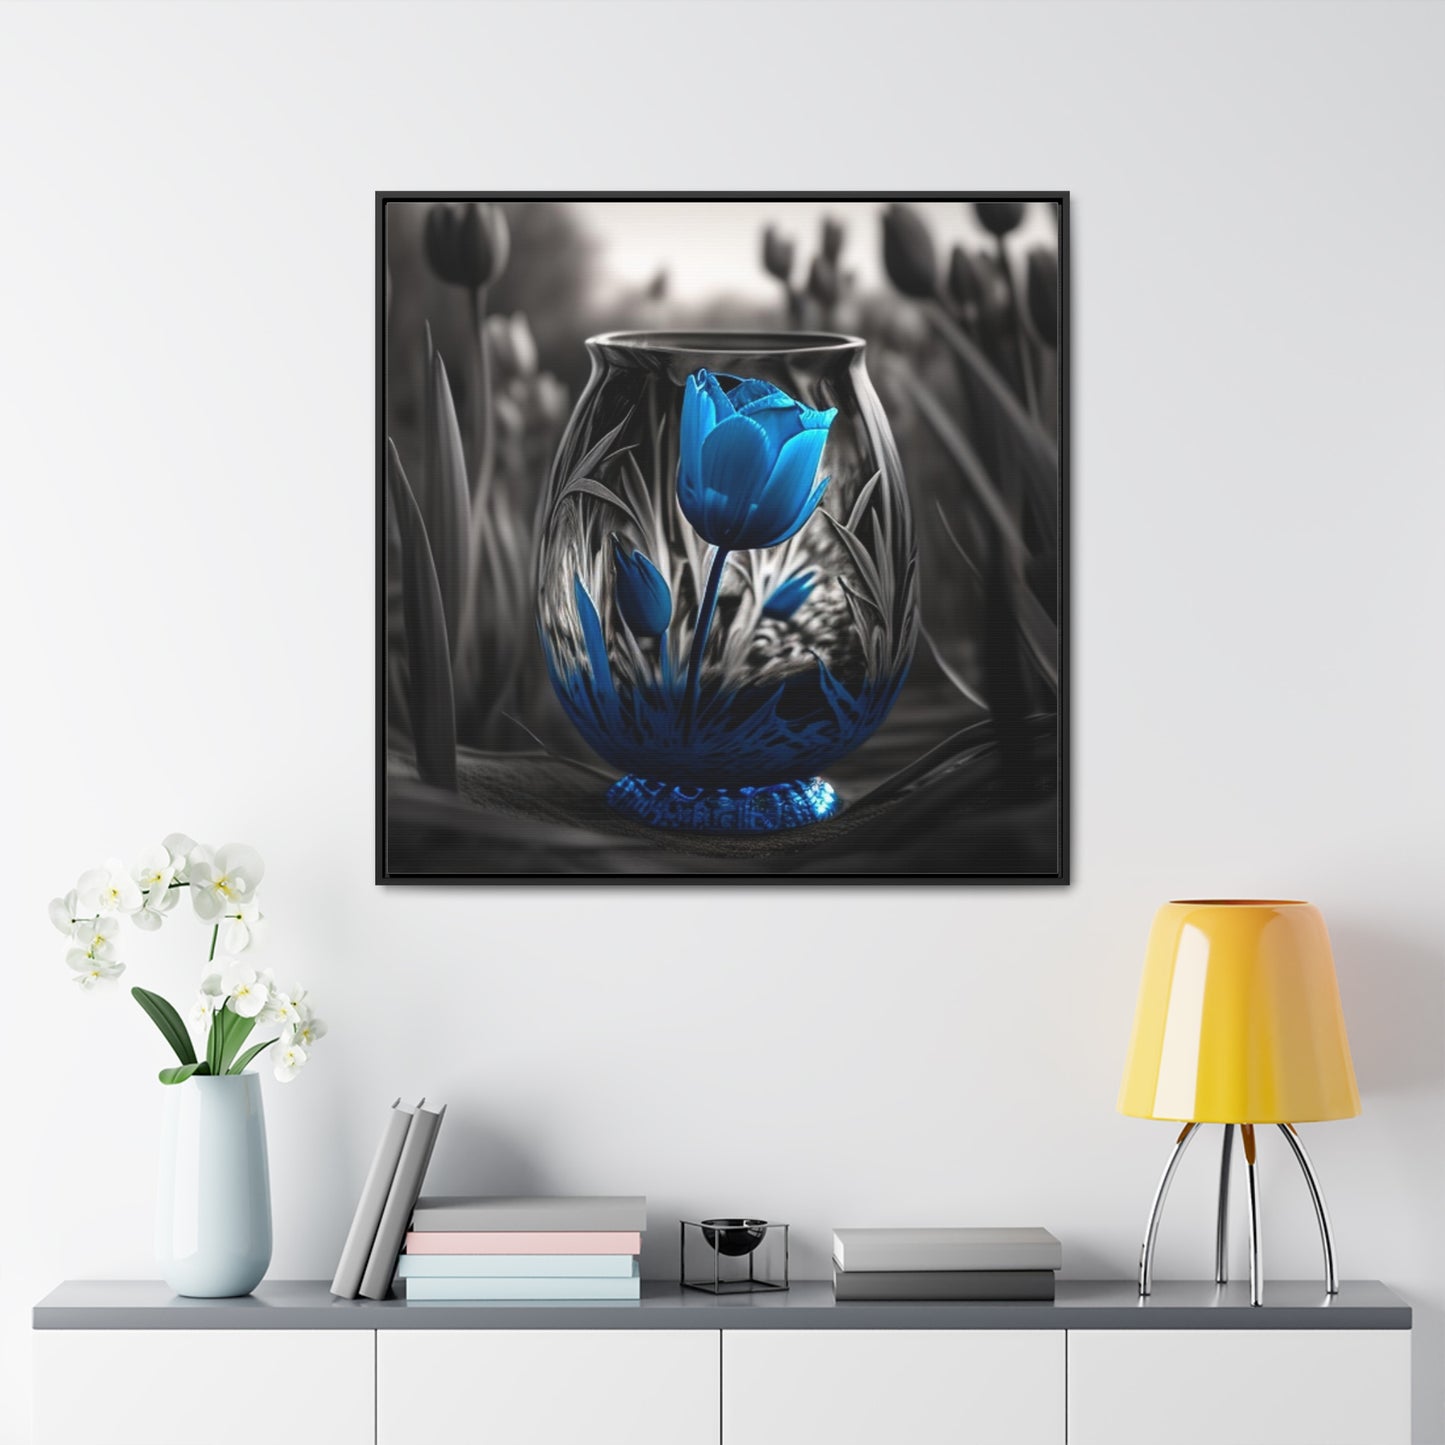 Gallery Canvas Wraps, Square Frame Tulip Blue 3